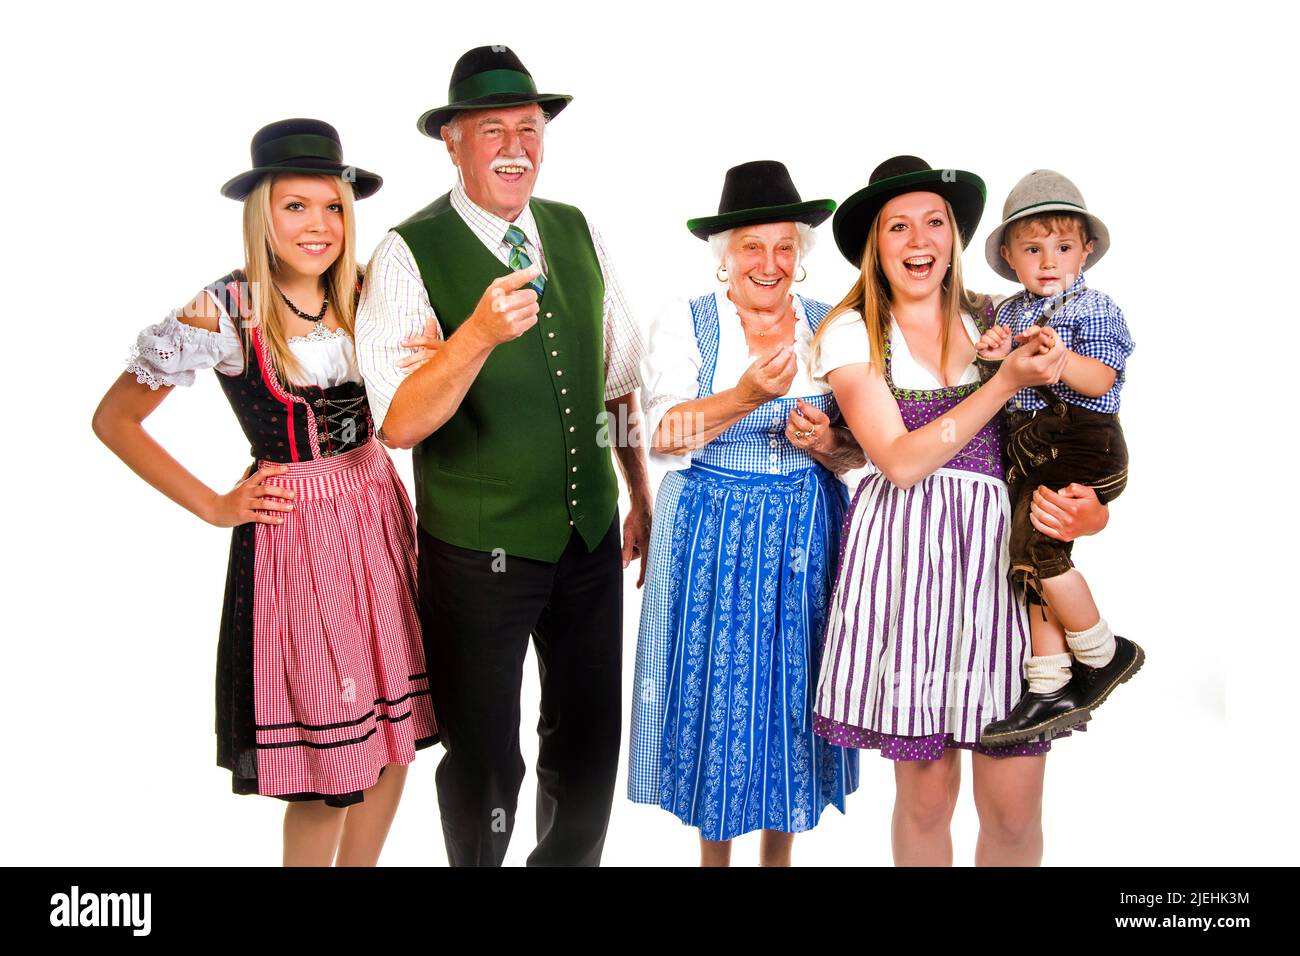 Jung und alt in Tracht - young and old in traditional costume Stock Photo